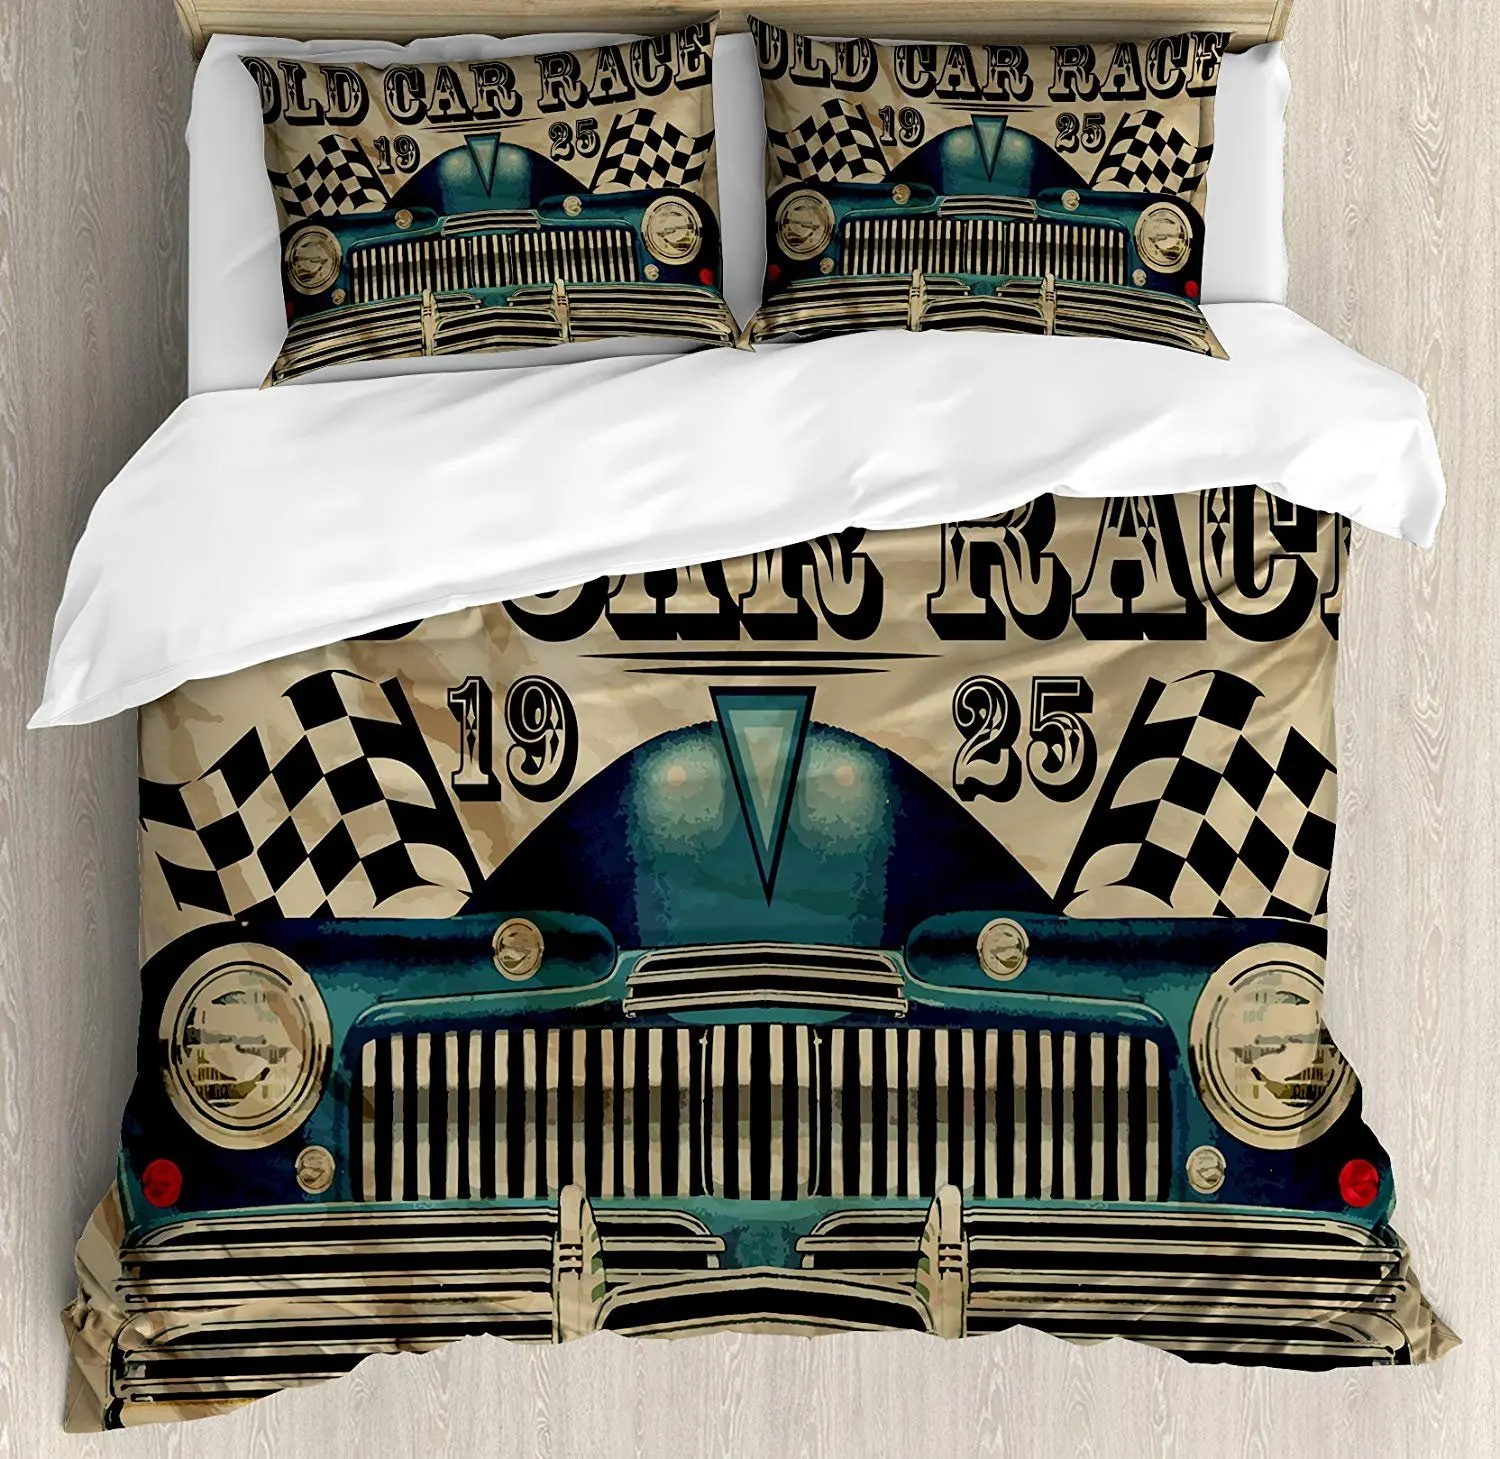 

Cars Bedding Set Traditional Old Car Race Theme Nostalgic American Car with Flags Rusty Look Duvet Cover Set Pillowcase for Home